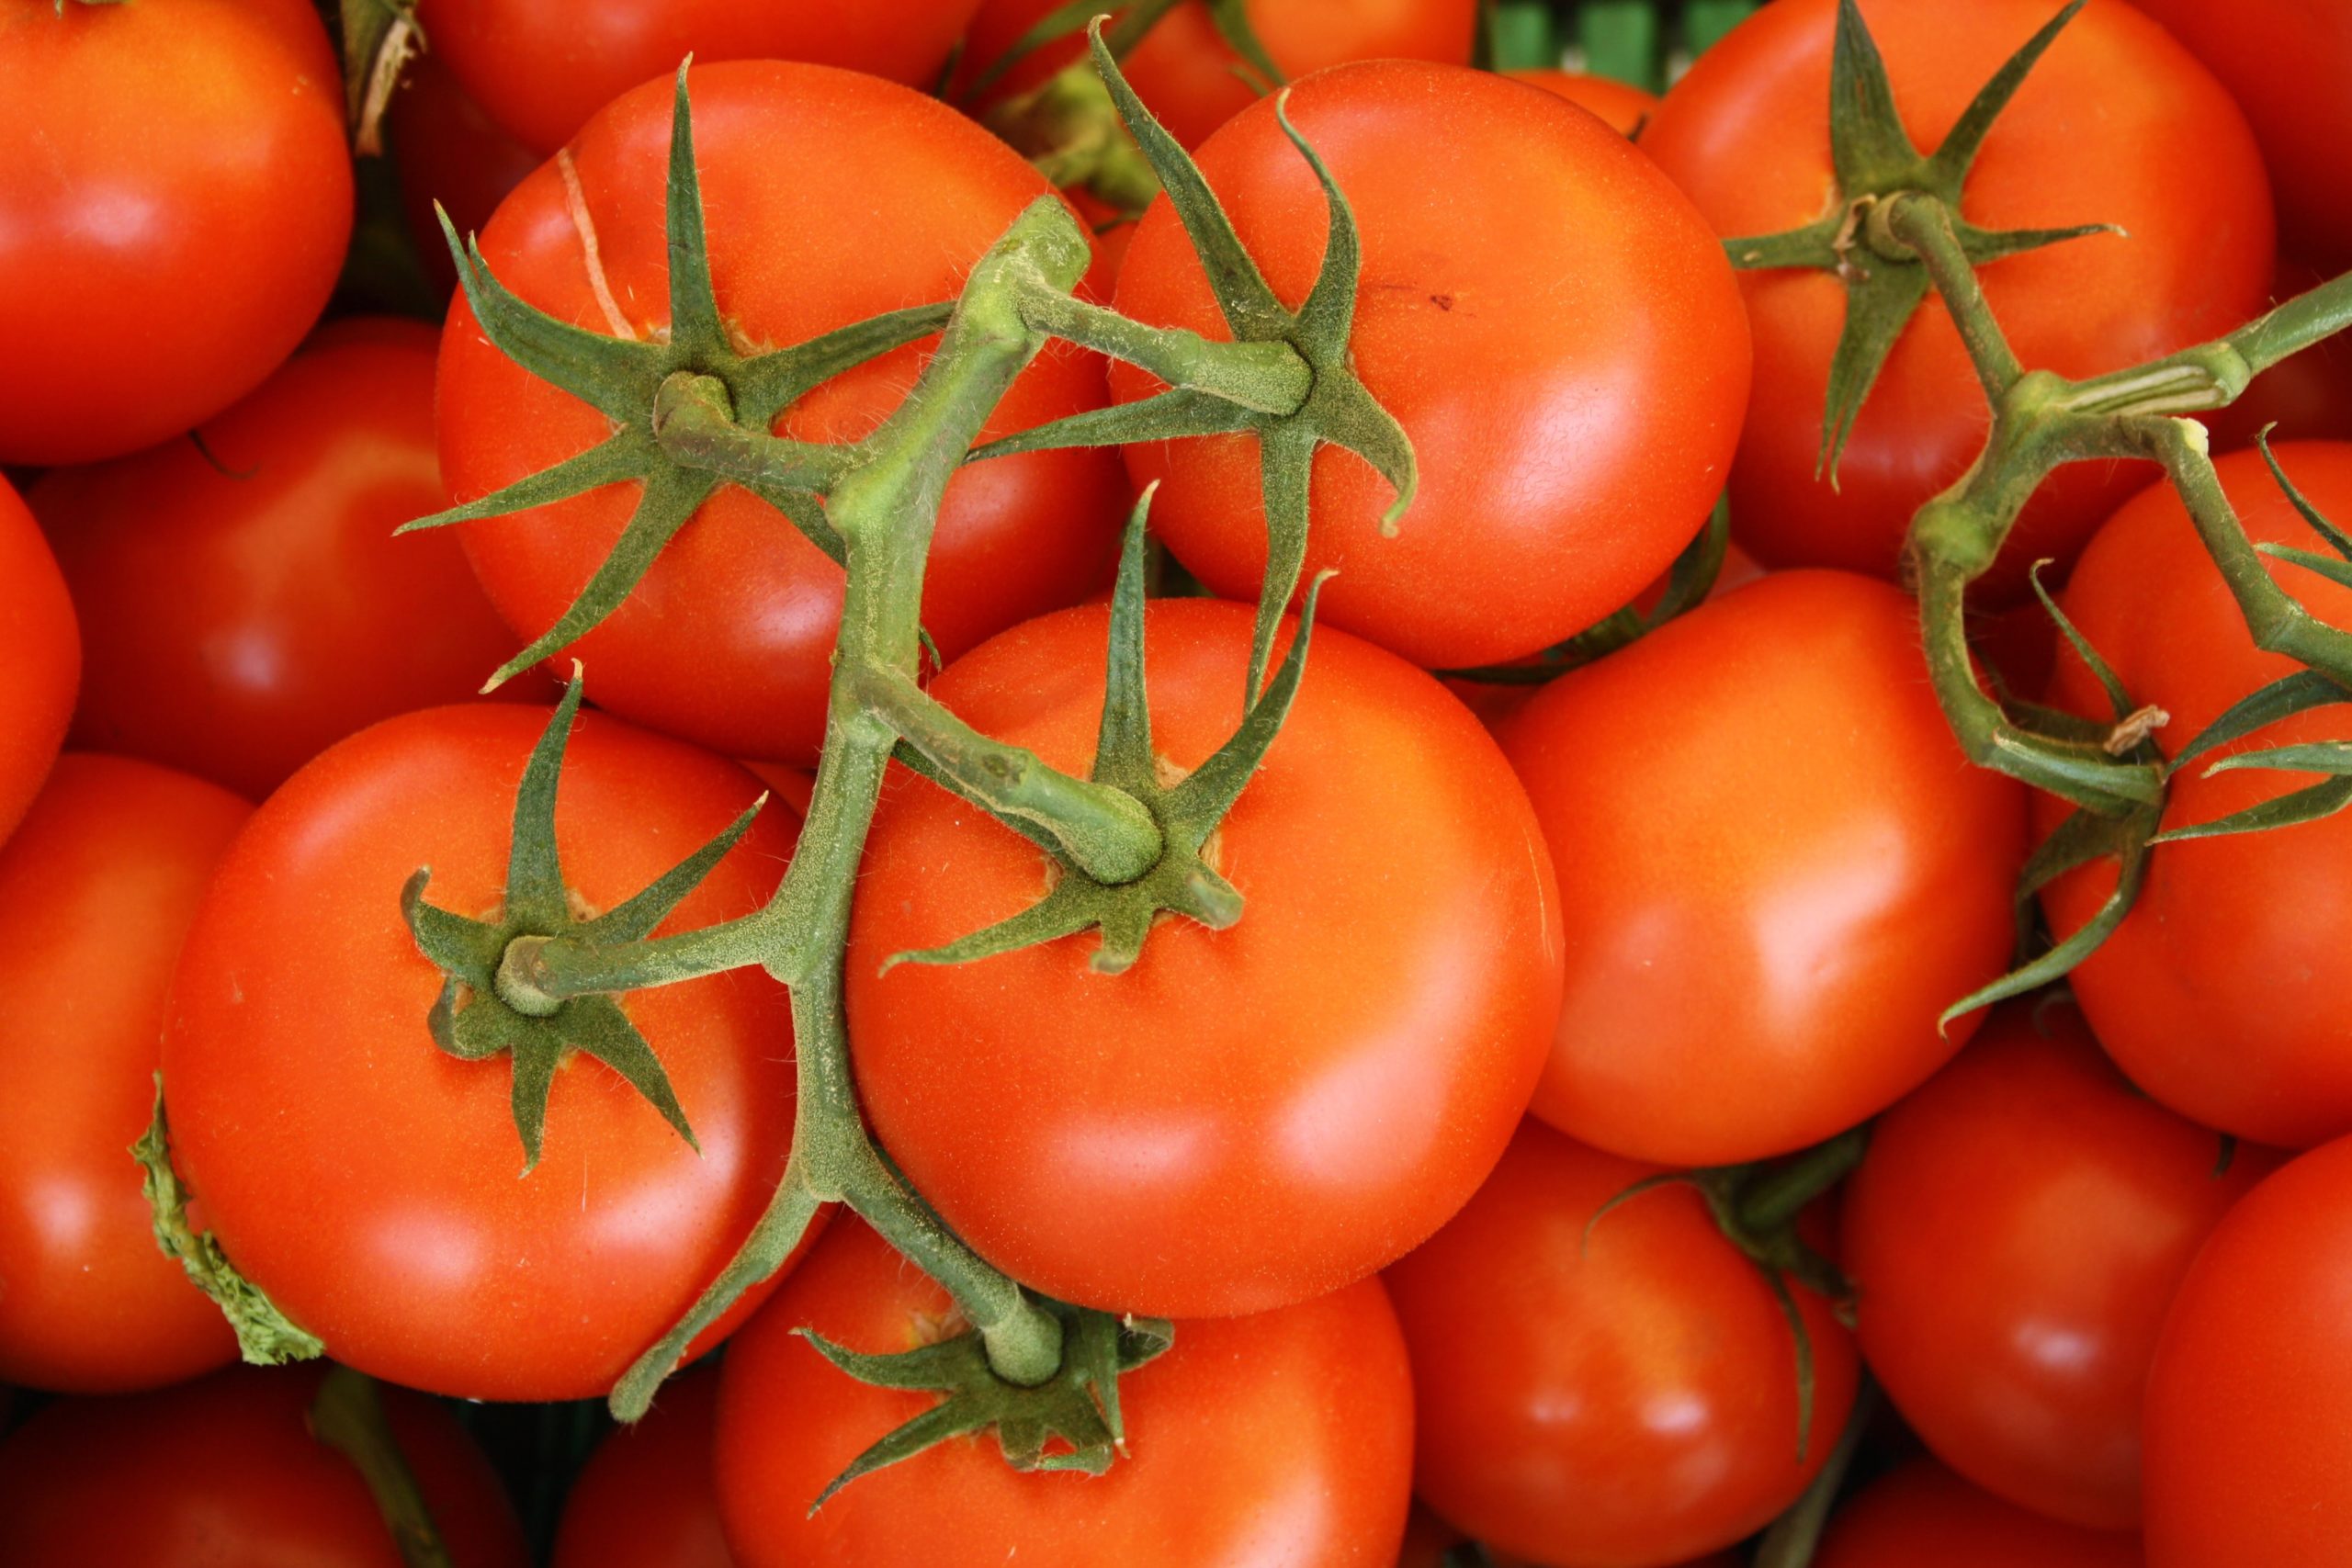 2 Pesky Tomato Viruses: How to Organically Prevent & Protect Your Tomato Plants